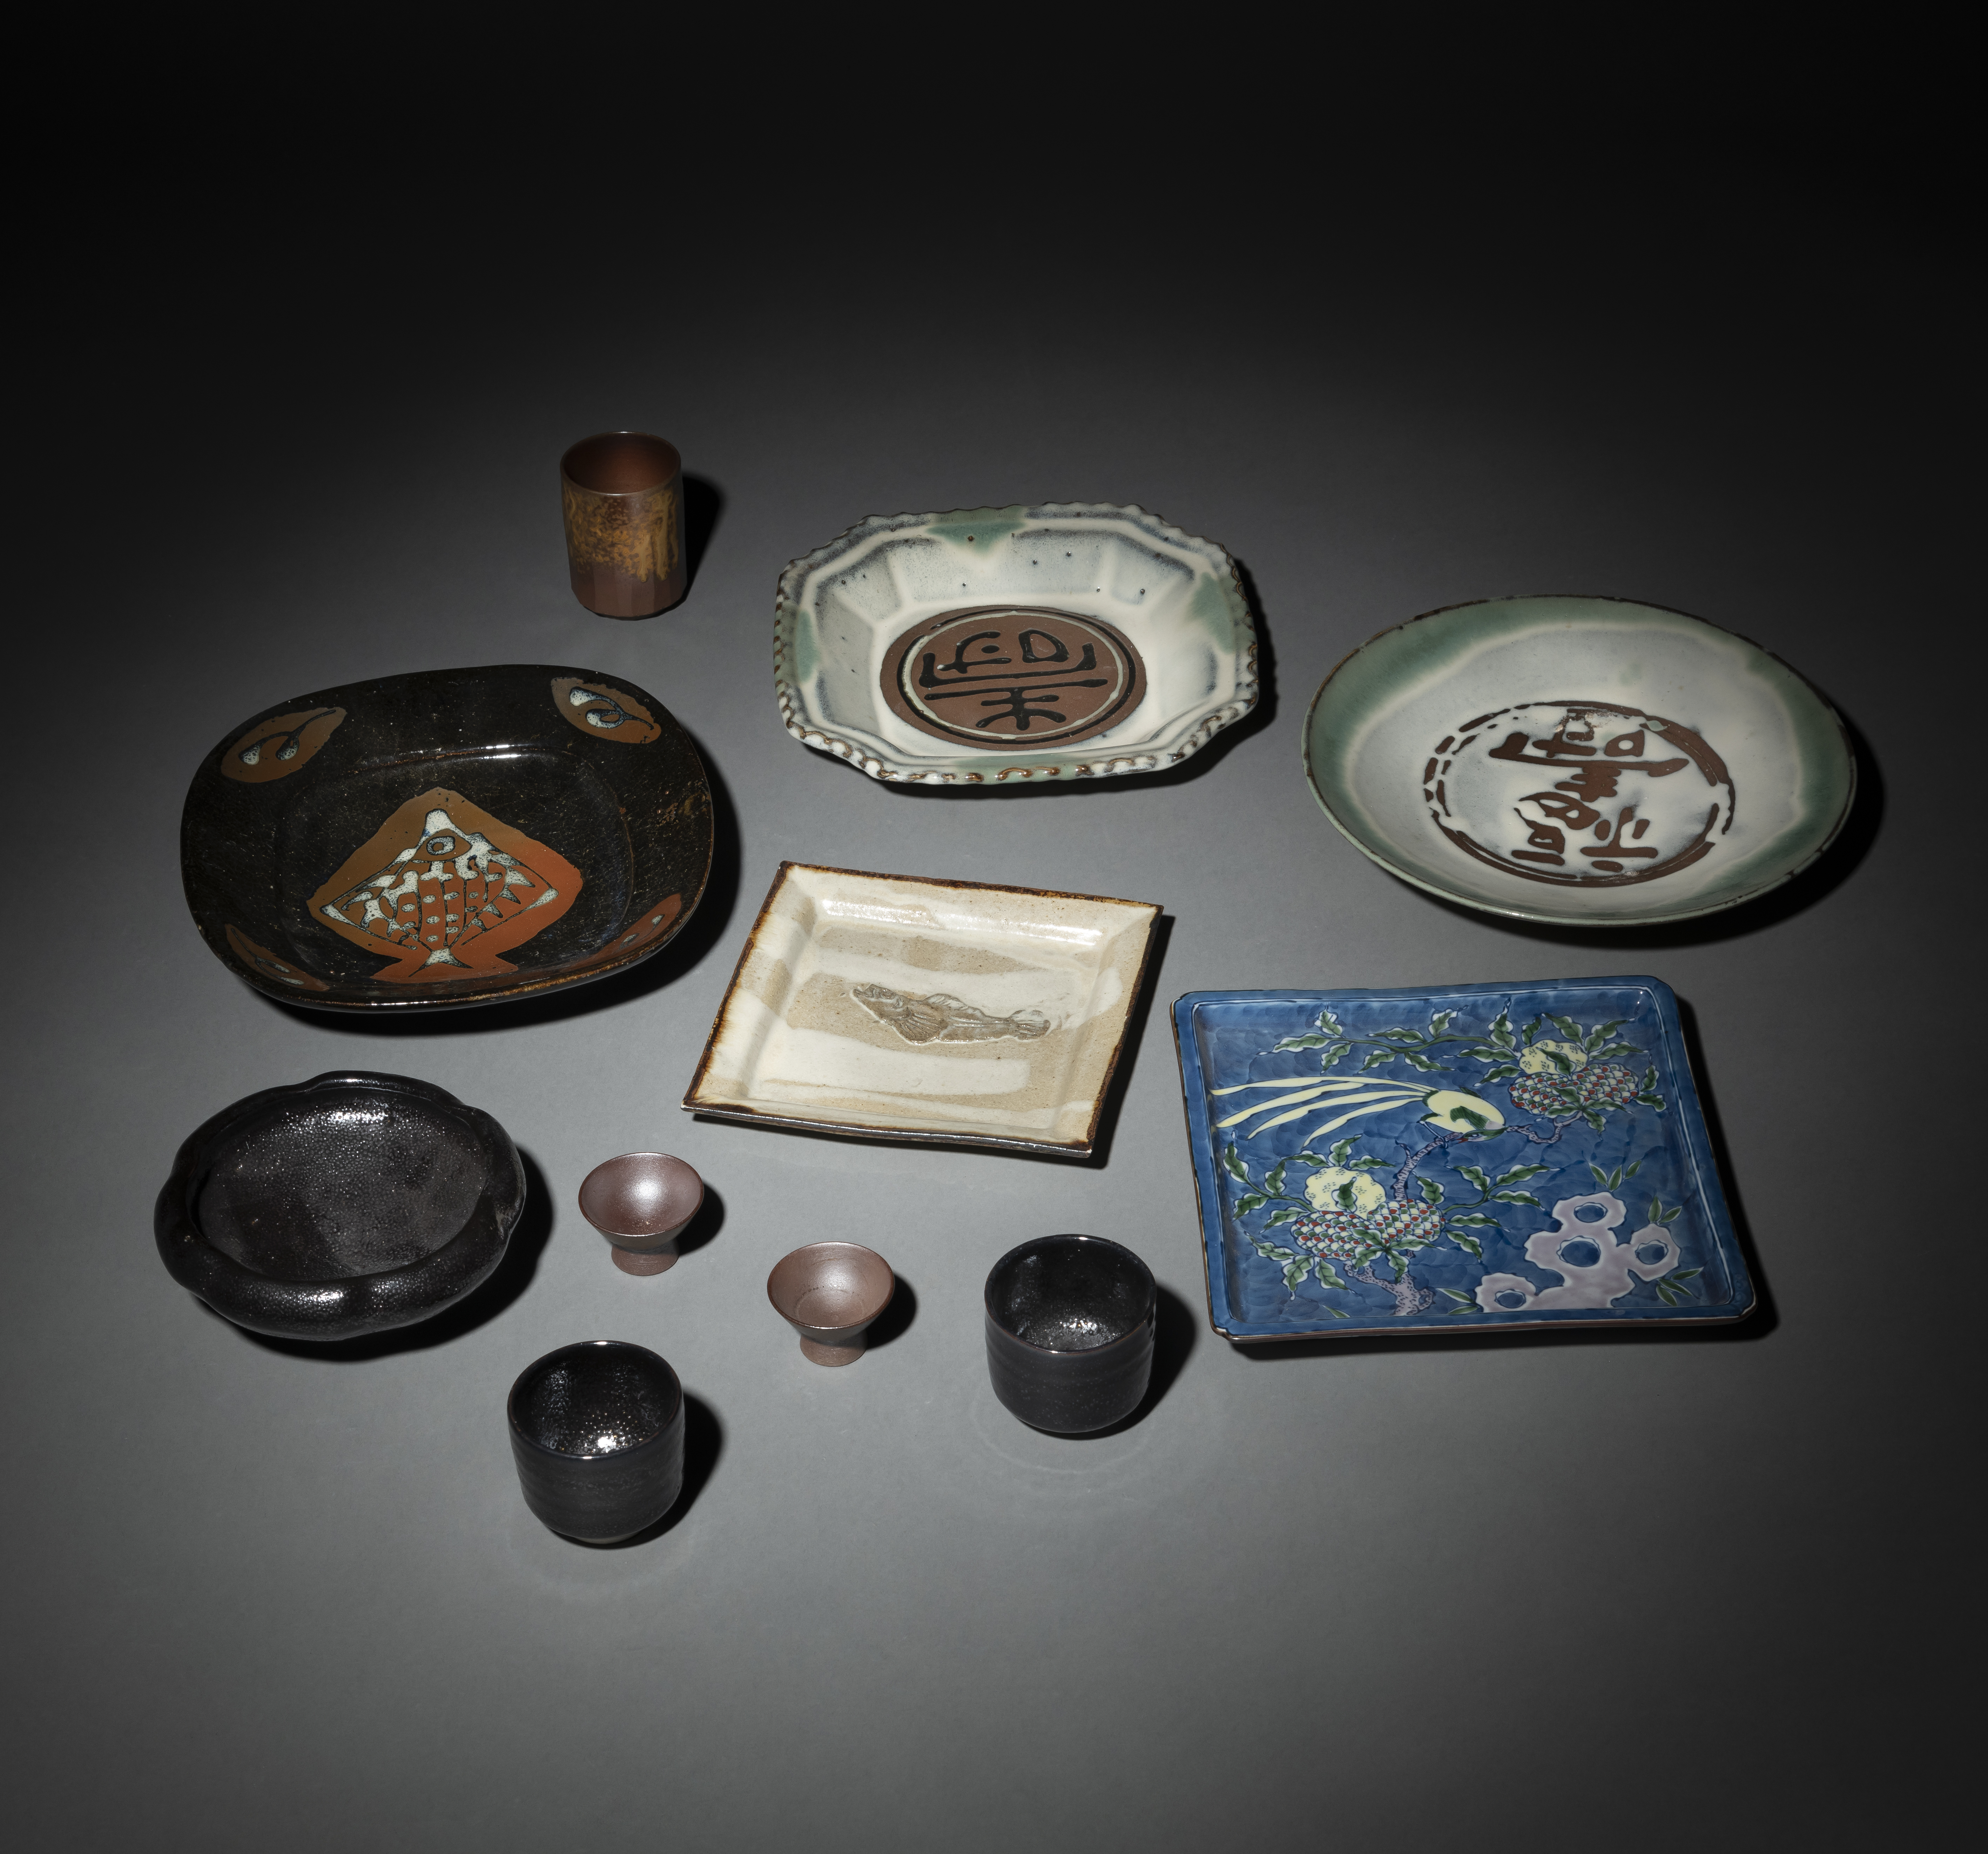 A GROUP OF STUDIO CERAMICS: TWO SQUARE AND THREE ROUND PLATES, A TEA BOWL, THREE TEA CUPS AND A PAI